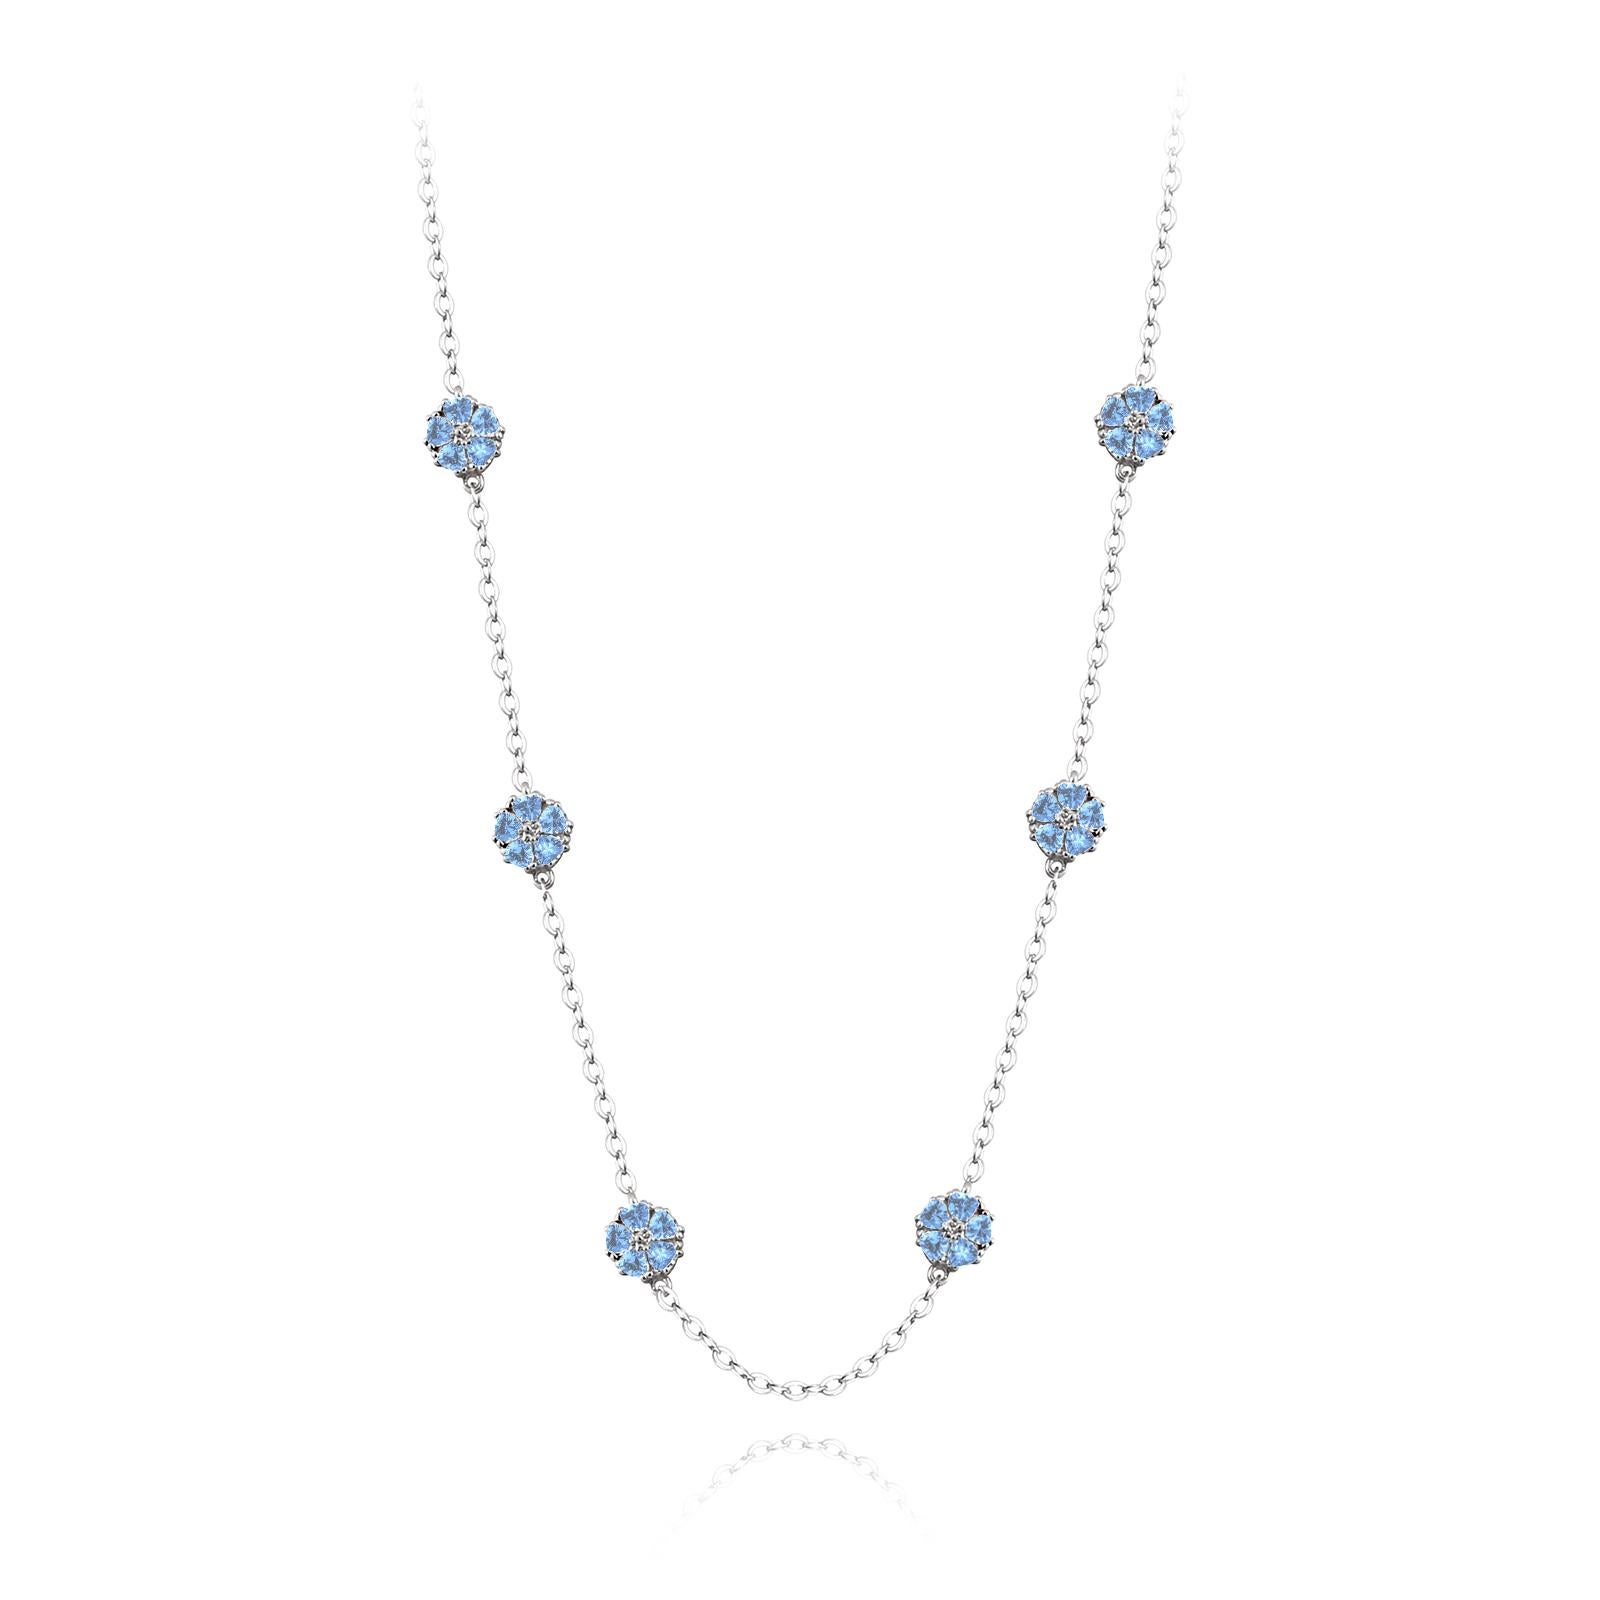 Whatever the season, take a little natural beauty with you everywhere you go. This delicate blossom chain necklace is the perfect complement to any style, day or night. An adjustable .925 sterling silver chain necklace with 3D blossoms with